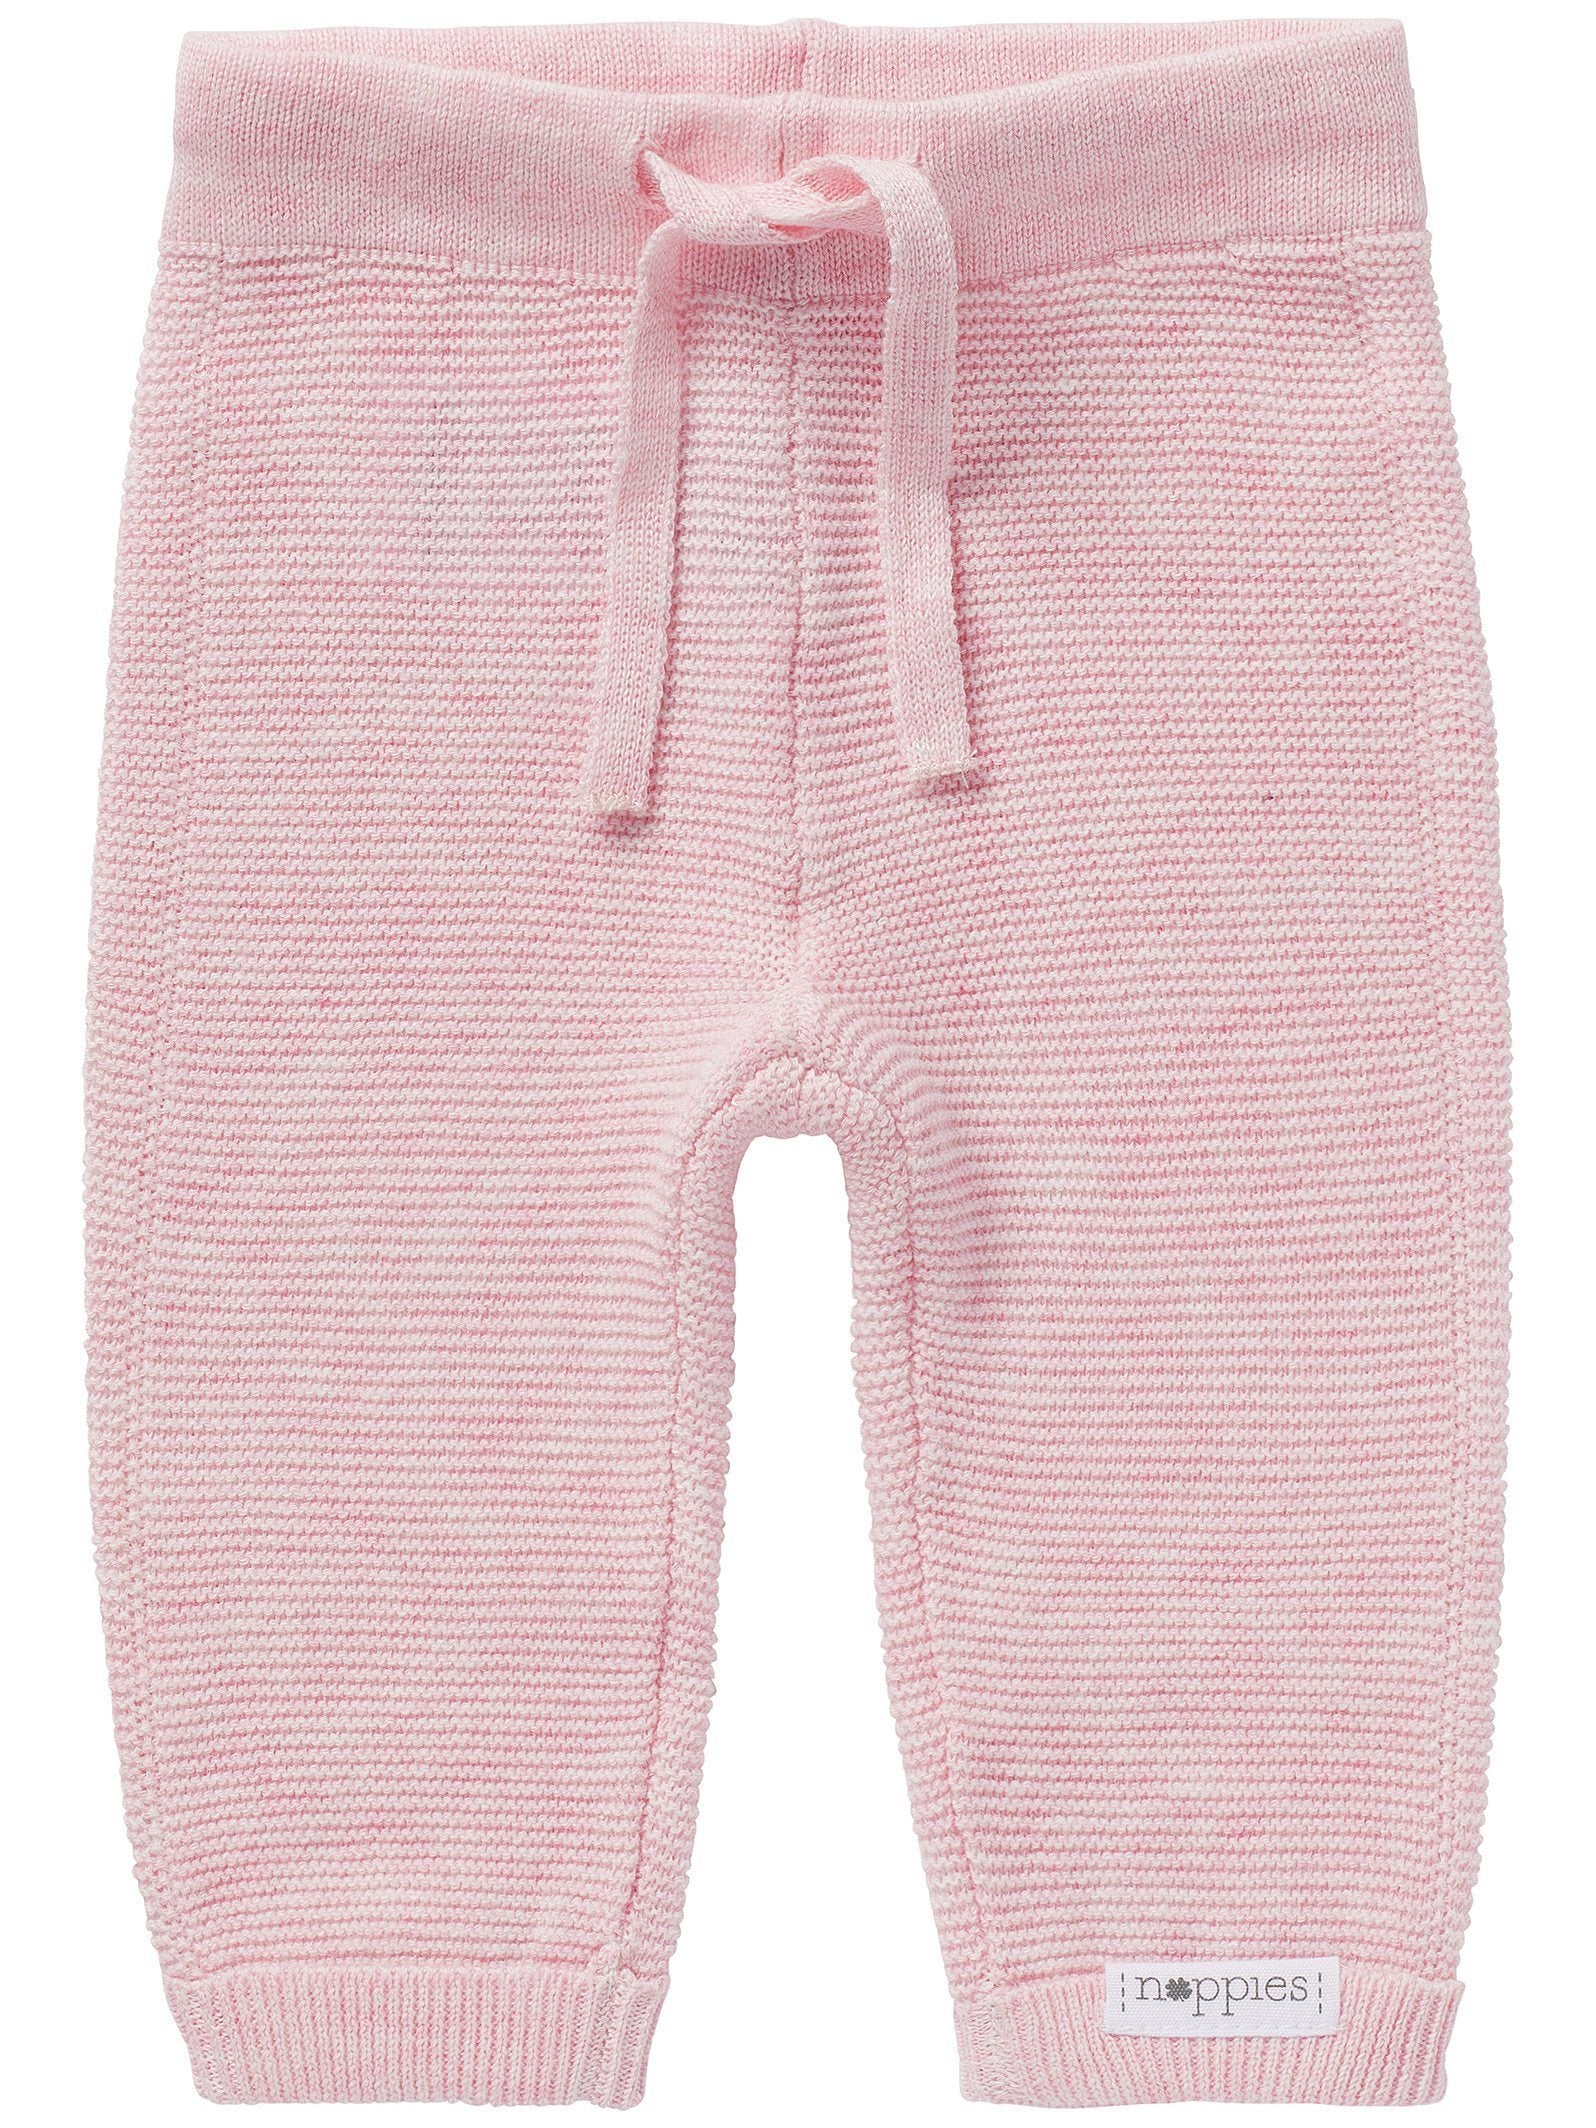 Pink Knitted Trousers - Organic Cotton - Trousers / Leggings - Noppies